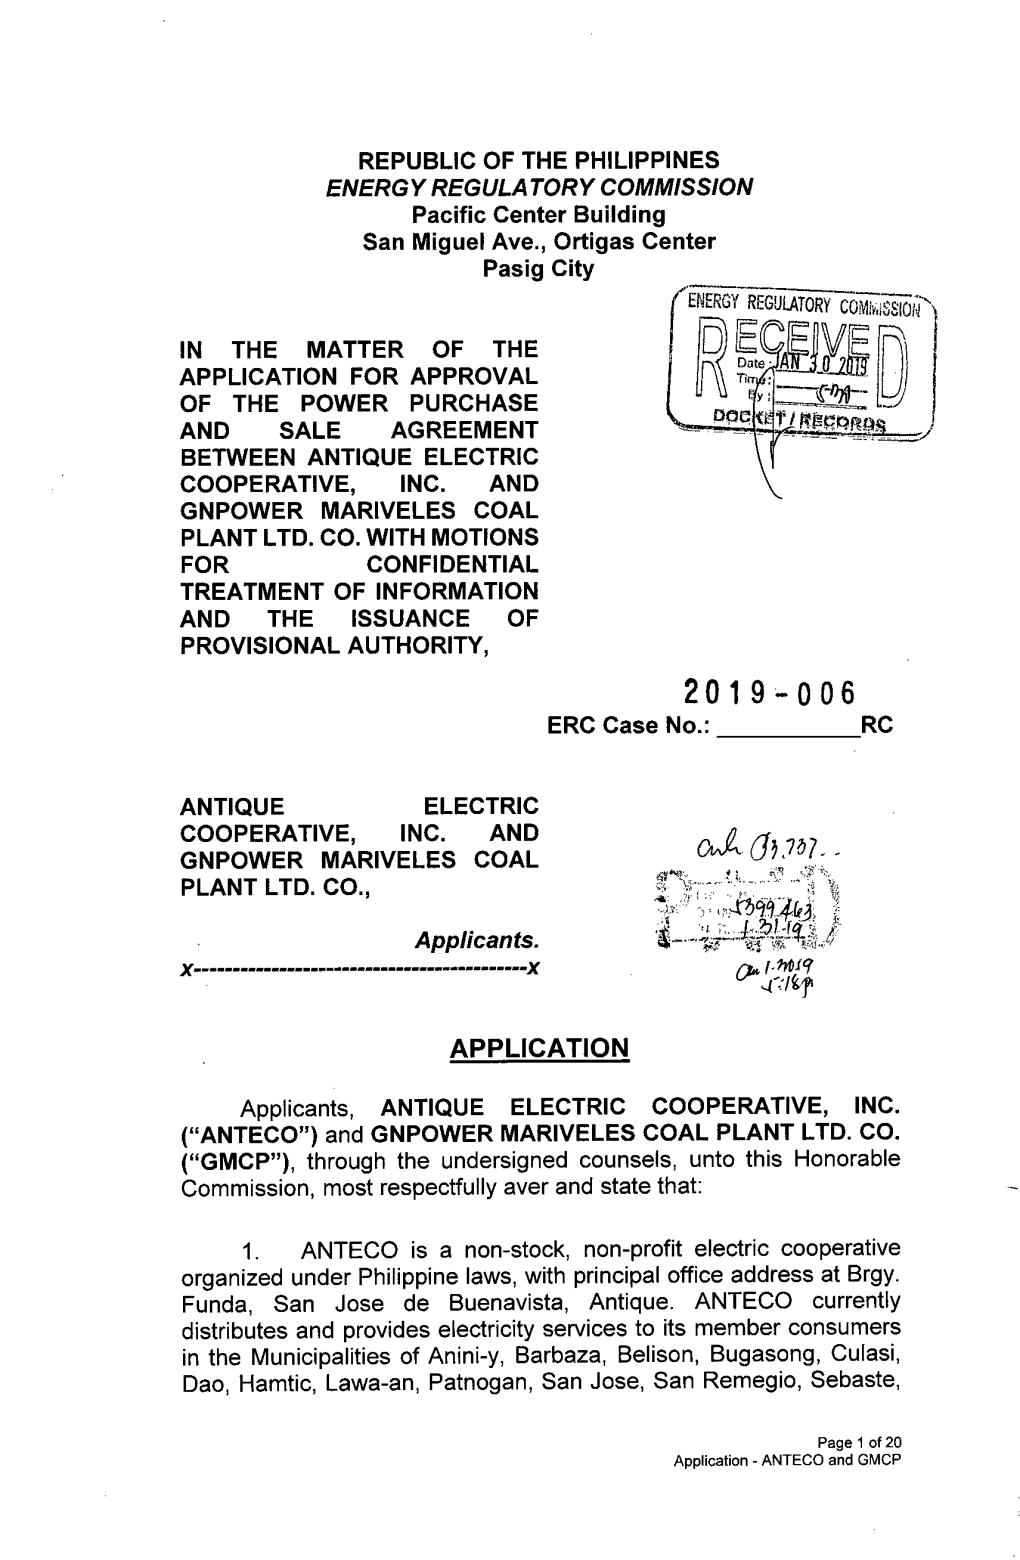 ~A Yol Application for Approval of the Power Purchase and Sale Agreement Between Antique Electric Cooperative, Inc